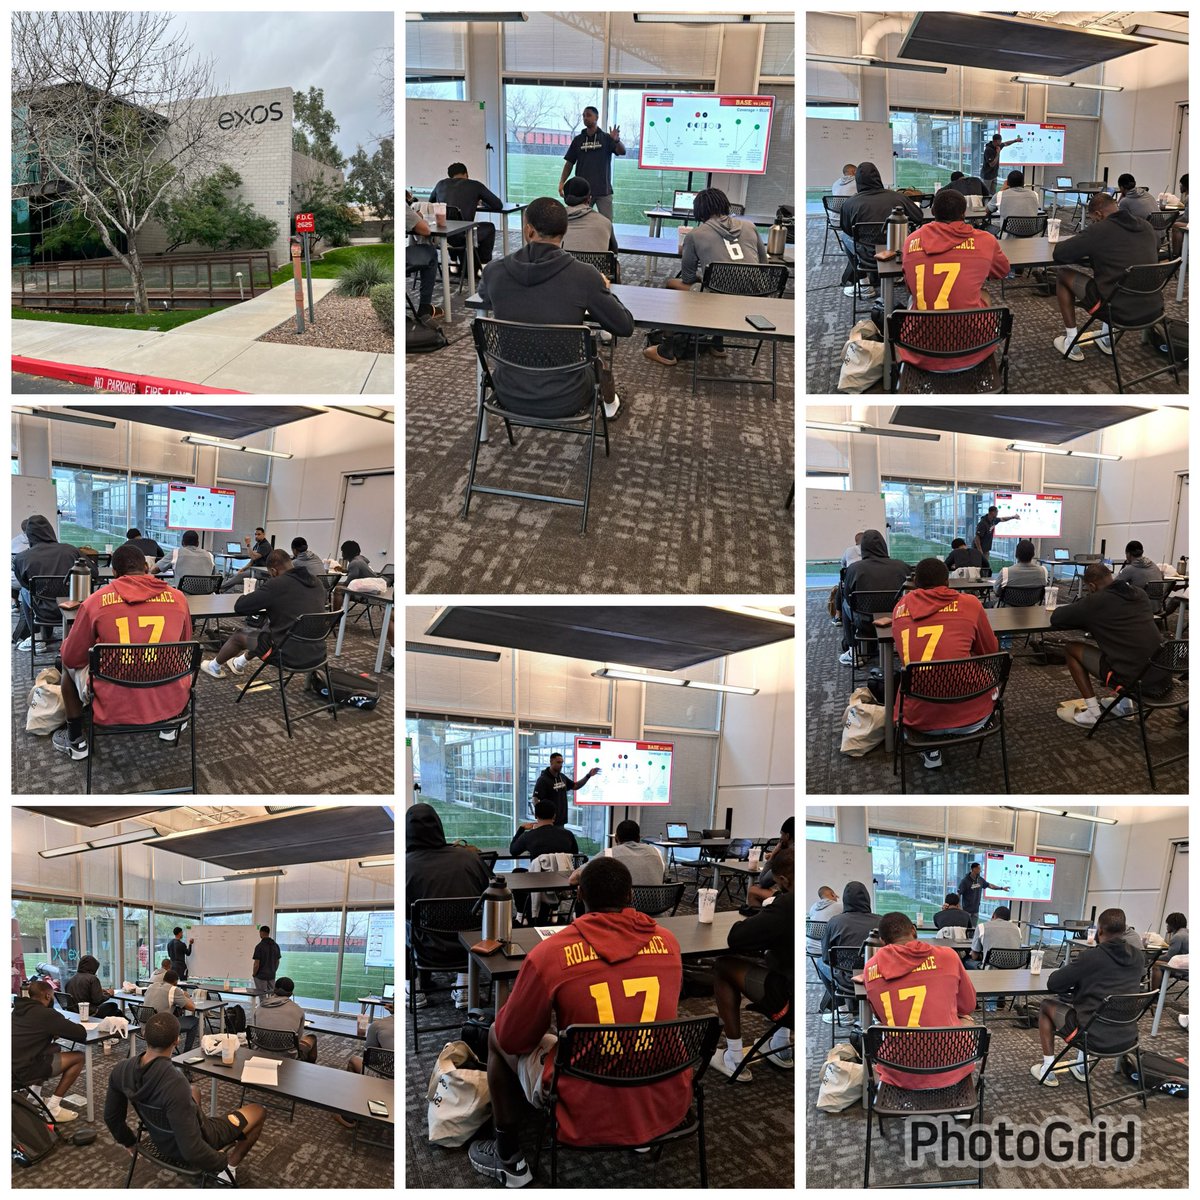 I Would Like To Thank @CoachChambers1 Will Sullivan @EXOSsports @TeamEXOS For Allowing @KelleyBeMoore And I To Represent @firestormfb For @JeffBowenACU To Seminar Future @NFL Players! Good Luck